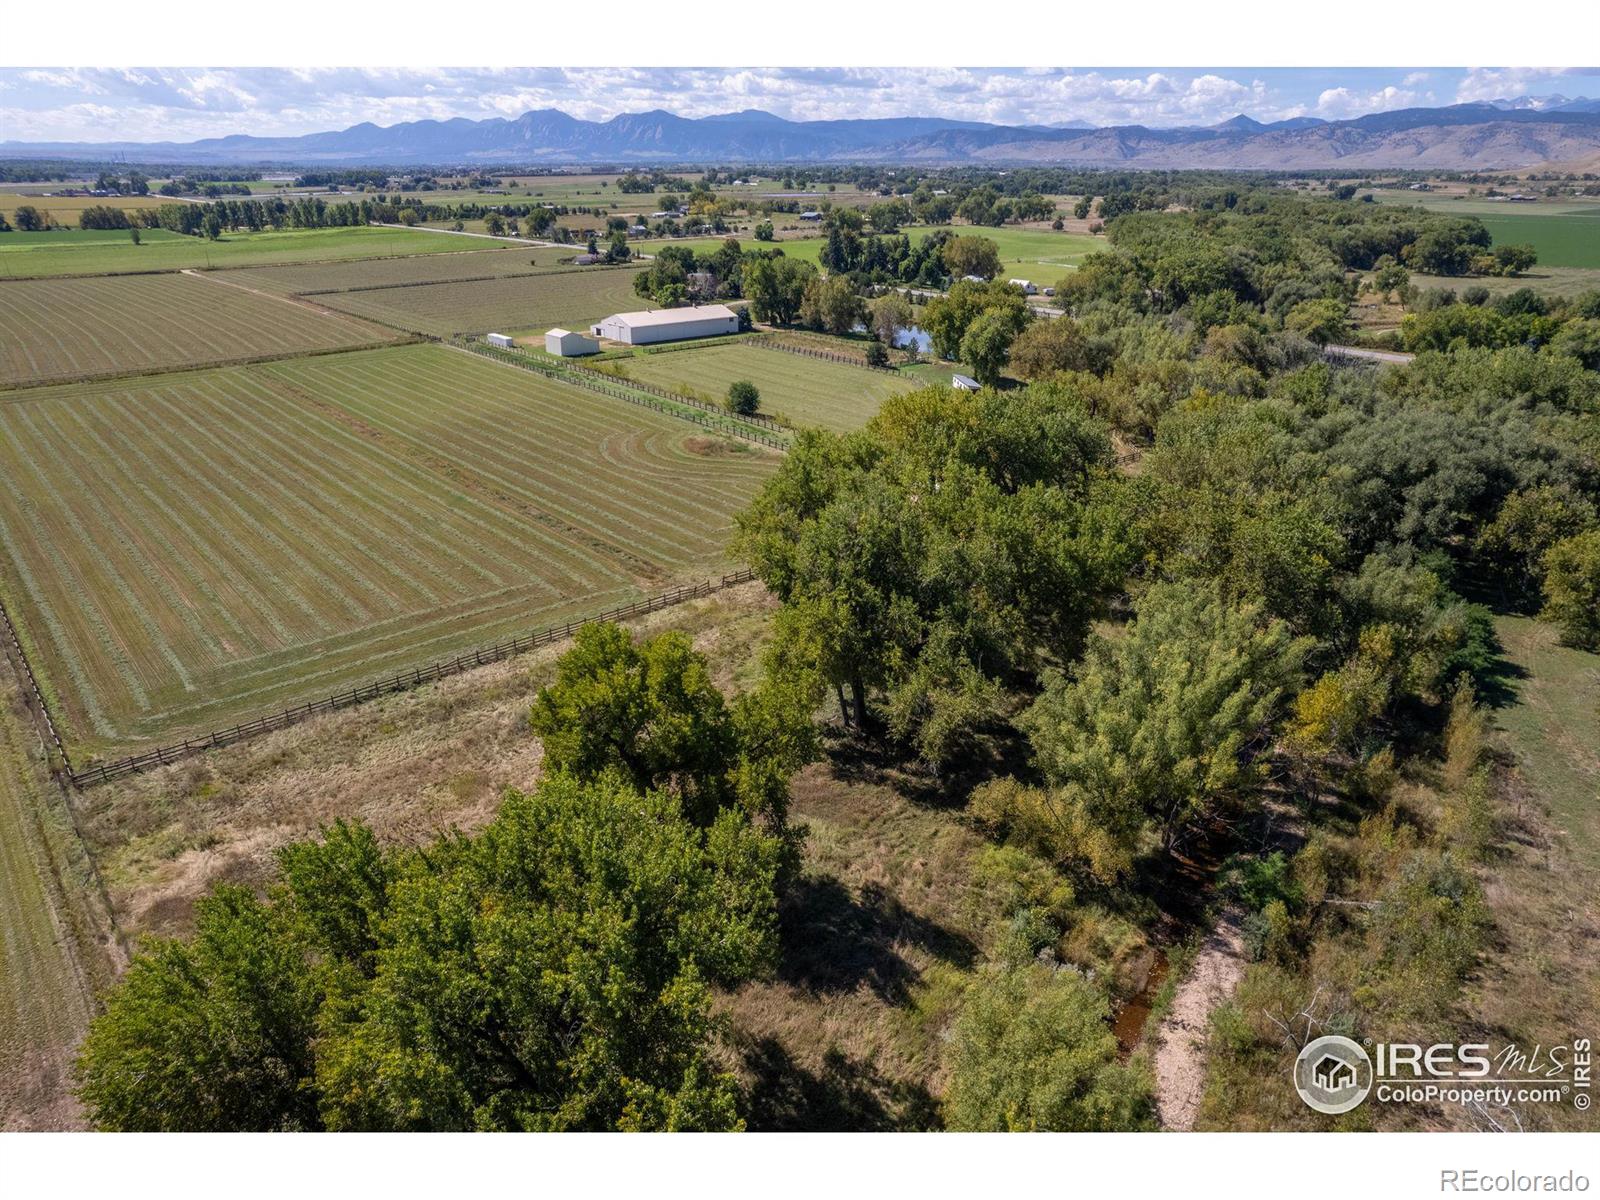 Report Image for 7720 N 73rd Street,Longmont, Colorado